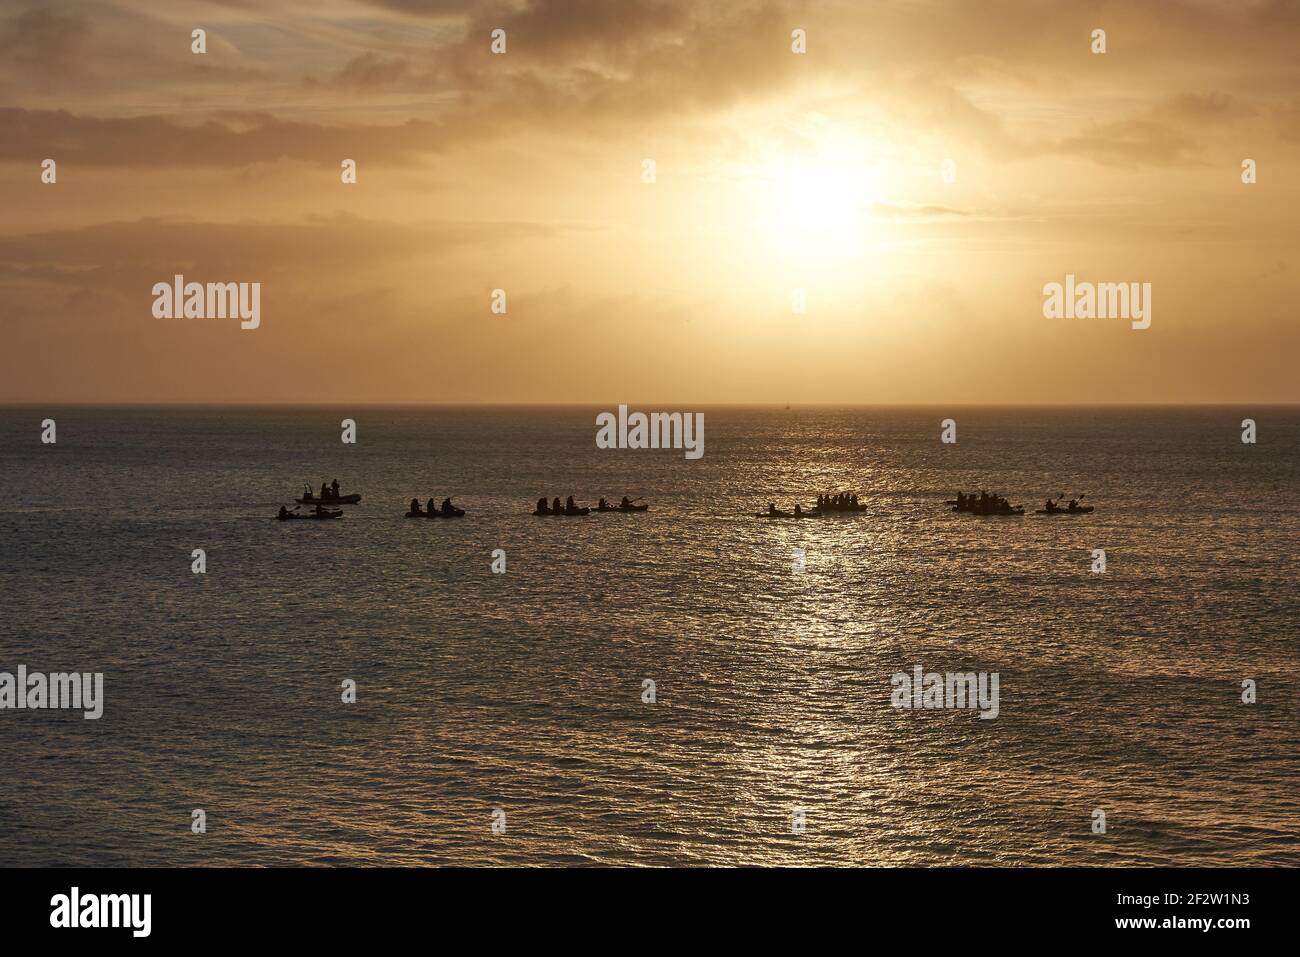 Sunrise by the sea with paddlers in rubber dinghies Stock Photo